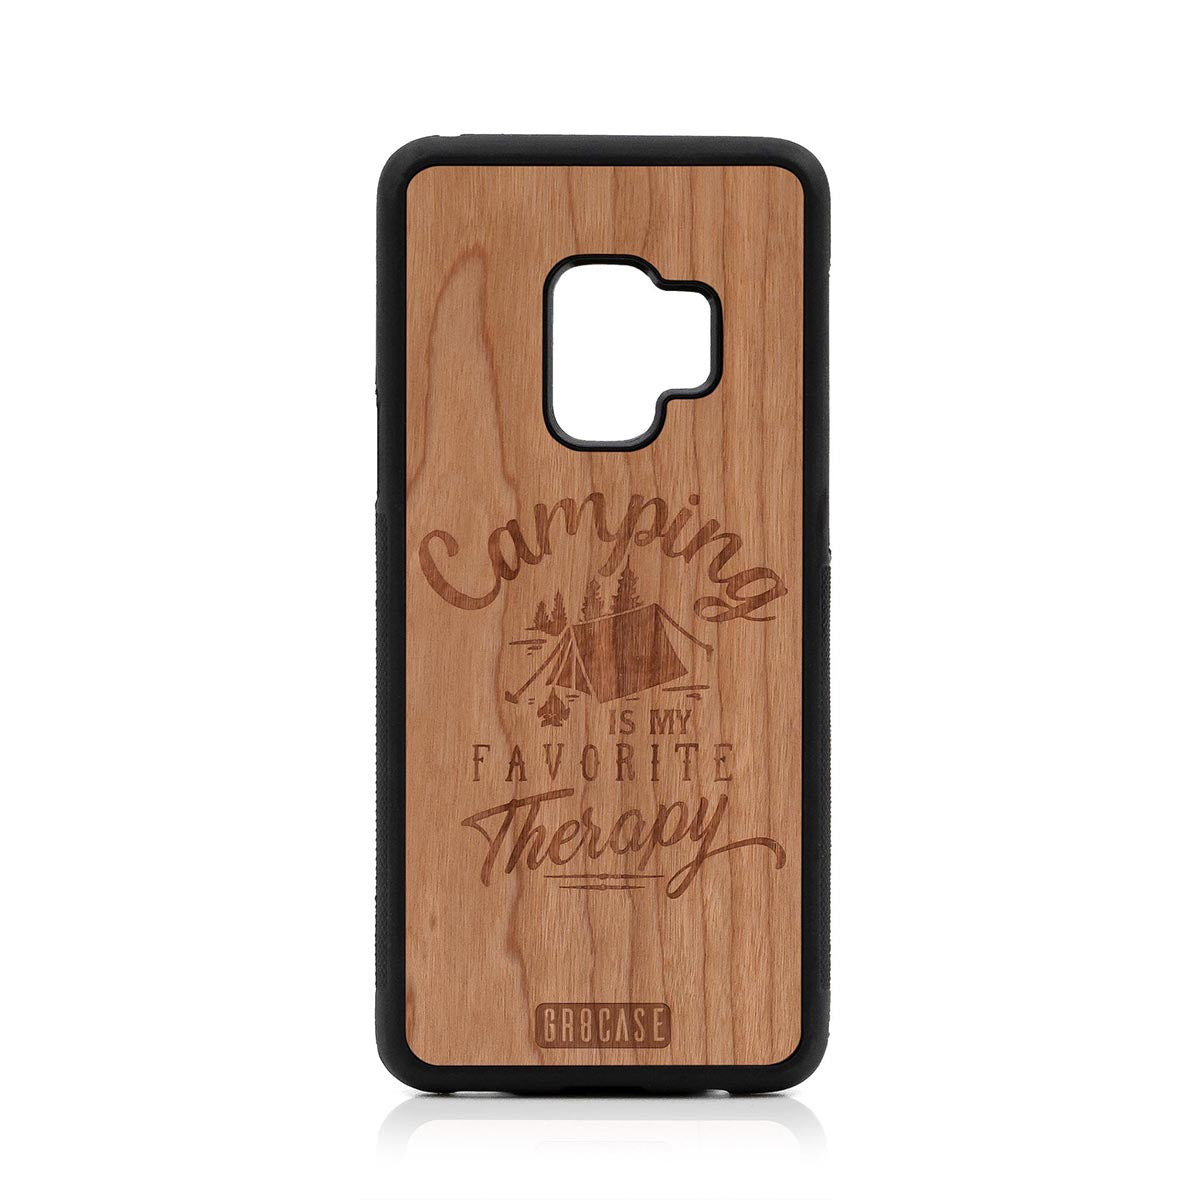 Camping Is My Favorite Therapy Design Wood Case For Samsung Galaxy S9 by GR8CASE